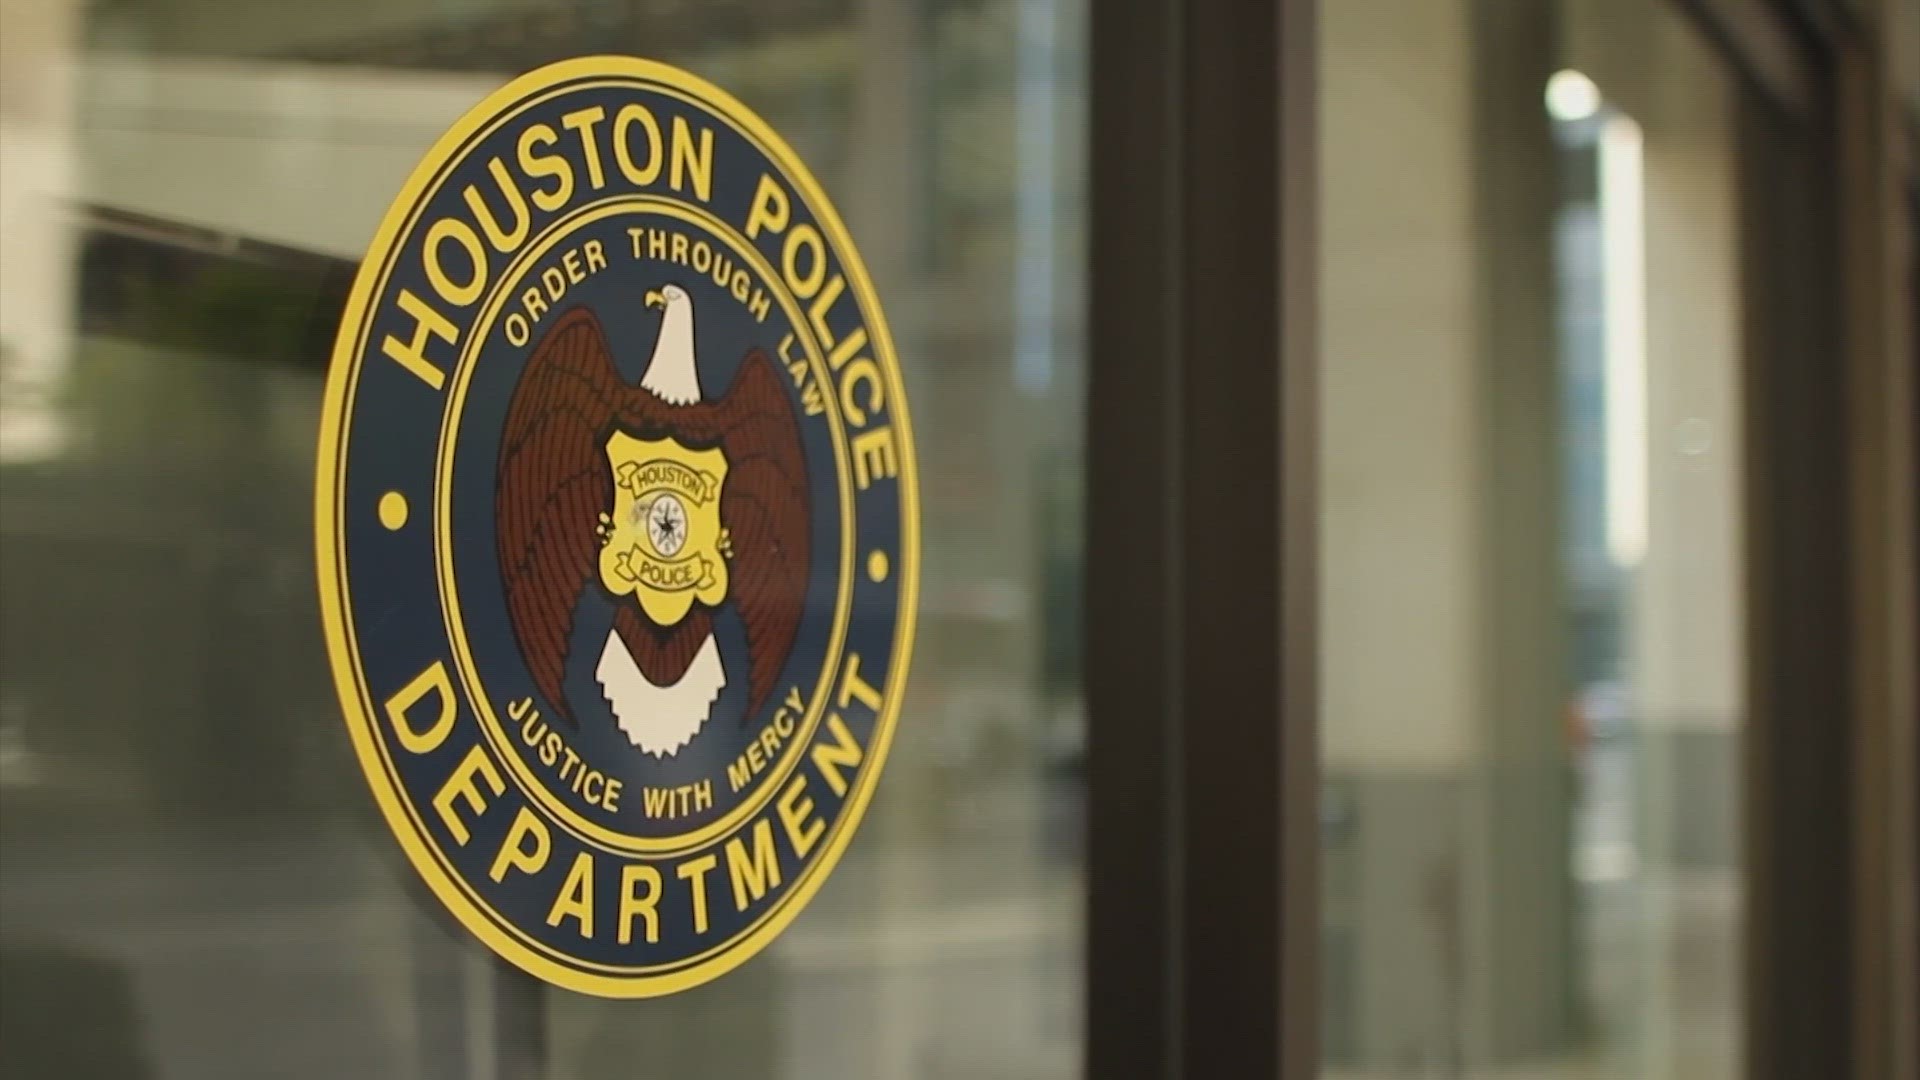 Houston Police Chief Troy Finner said the cases should have never been suspended in the first place and it won't continue.